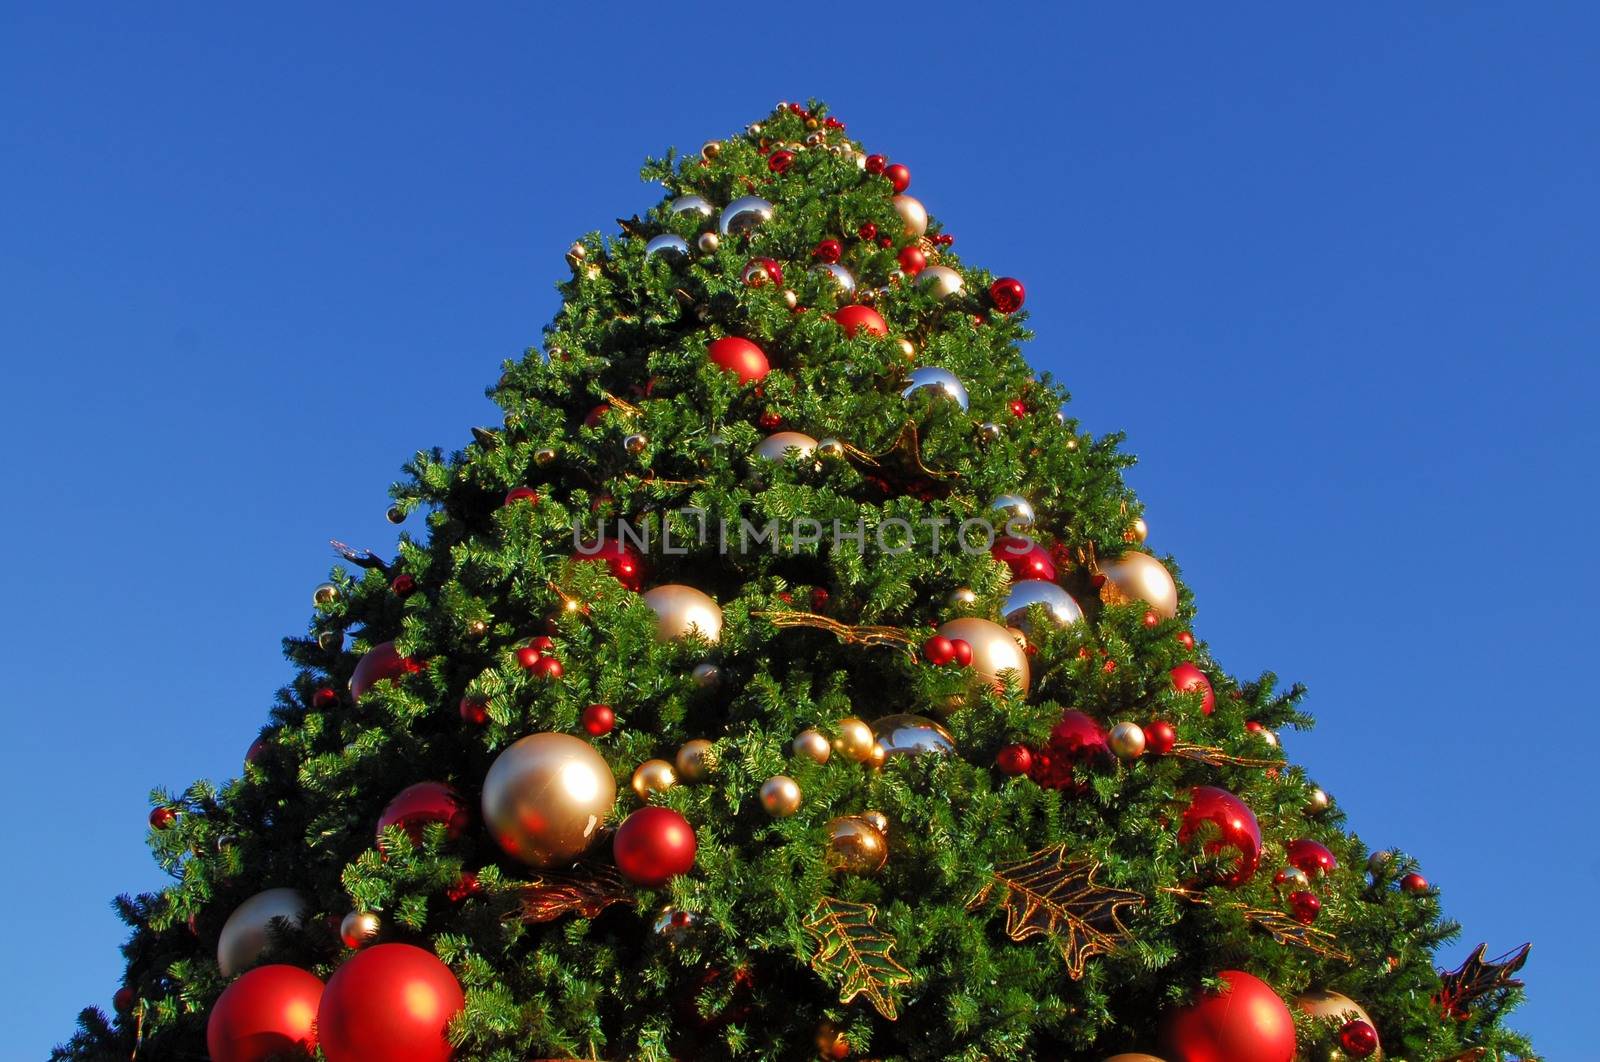 Big Christmas tree decorated with baubles and ornaments